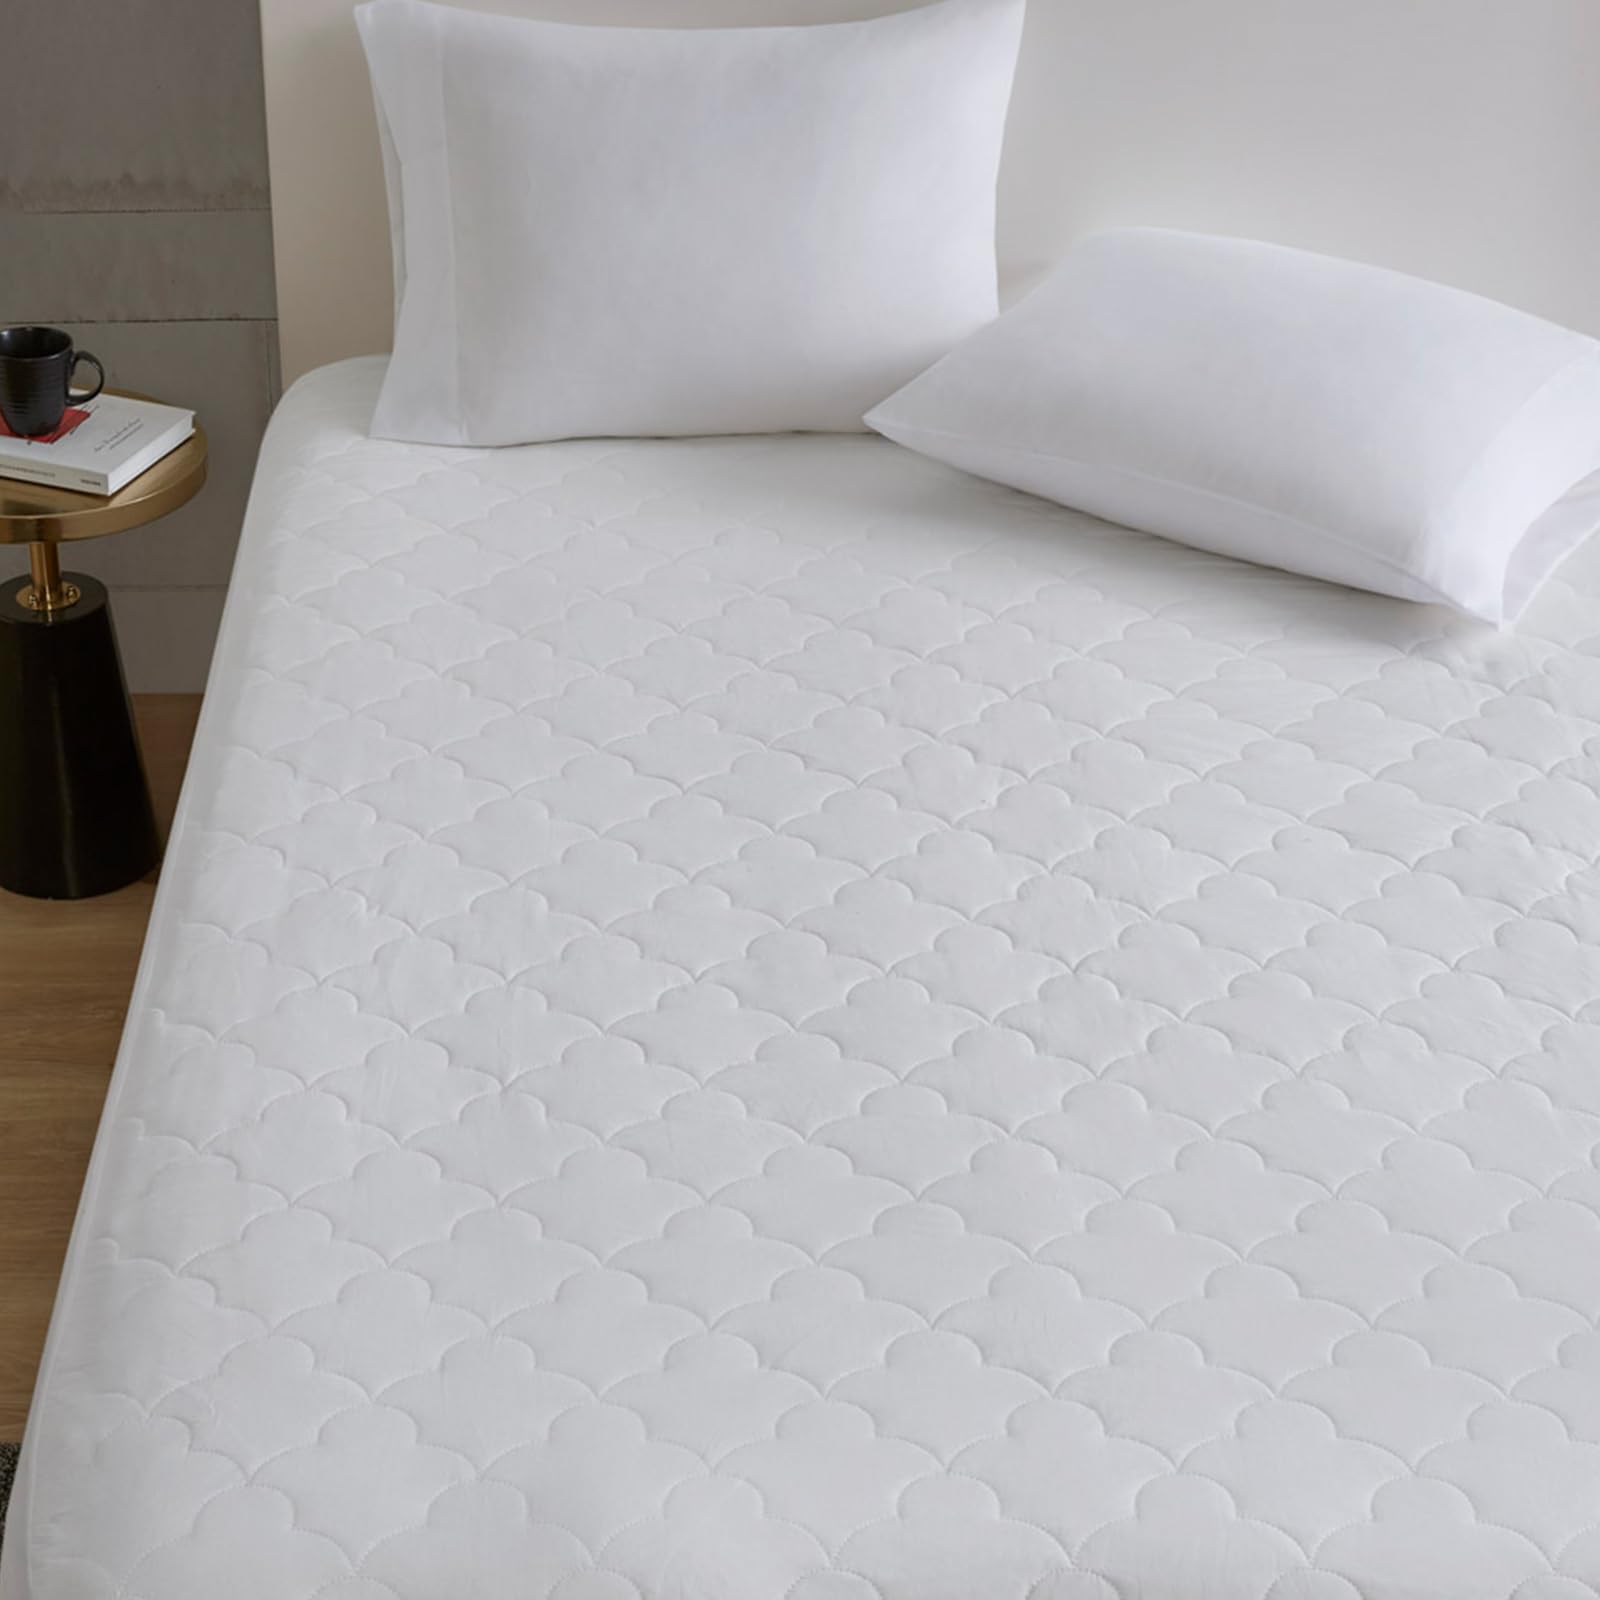 Sleep Philosophy Queen Mattress Pad, Cotton Mattress Protector Classic Cloud Quilted Bed Cover, All Natural Breathable Mattress